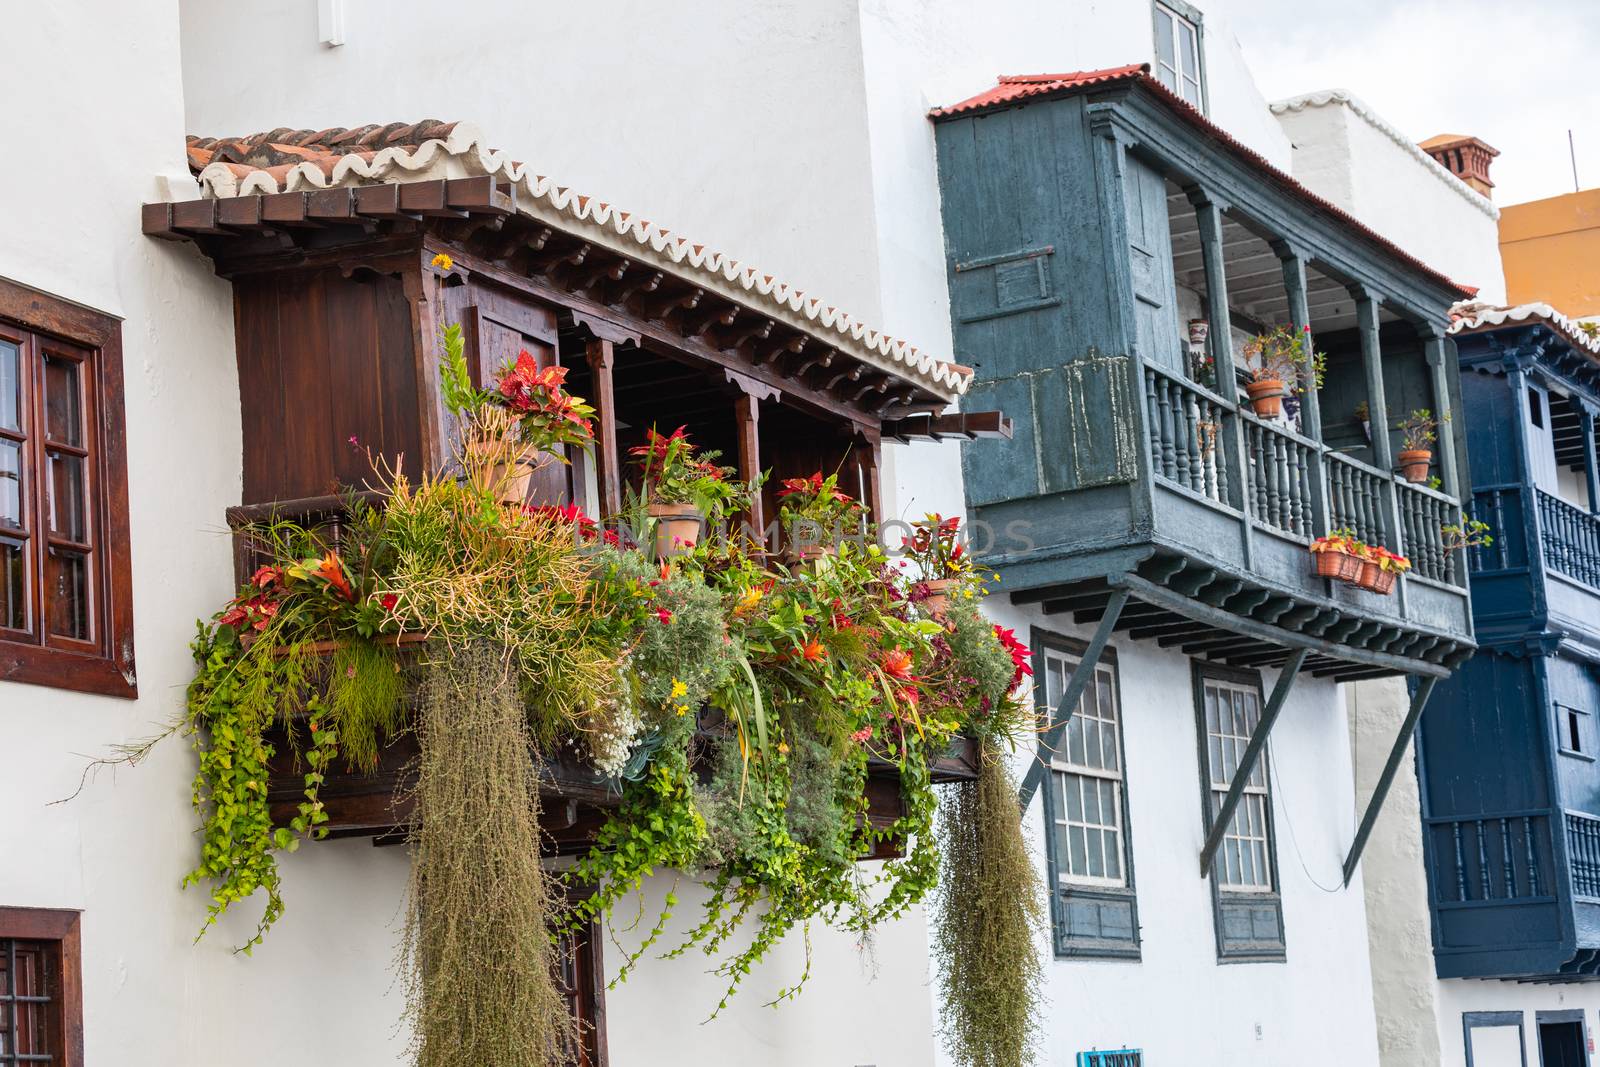 Famous ancient colorful balconies decorated with flowers. Santa Cruz - capital city of the island of La Palma, Canary Islands, Spain.